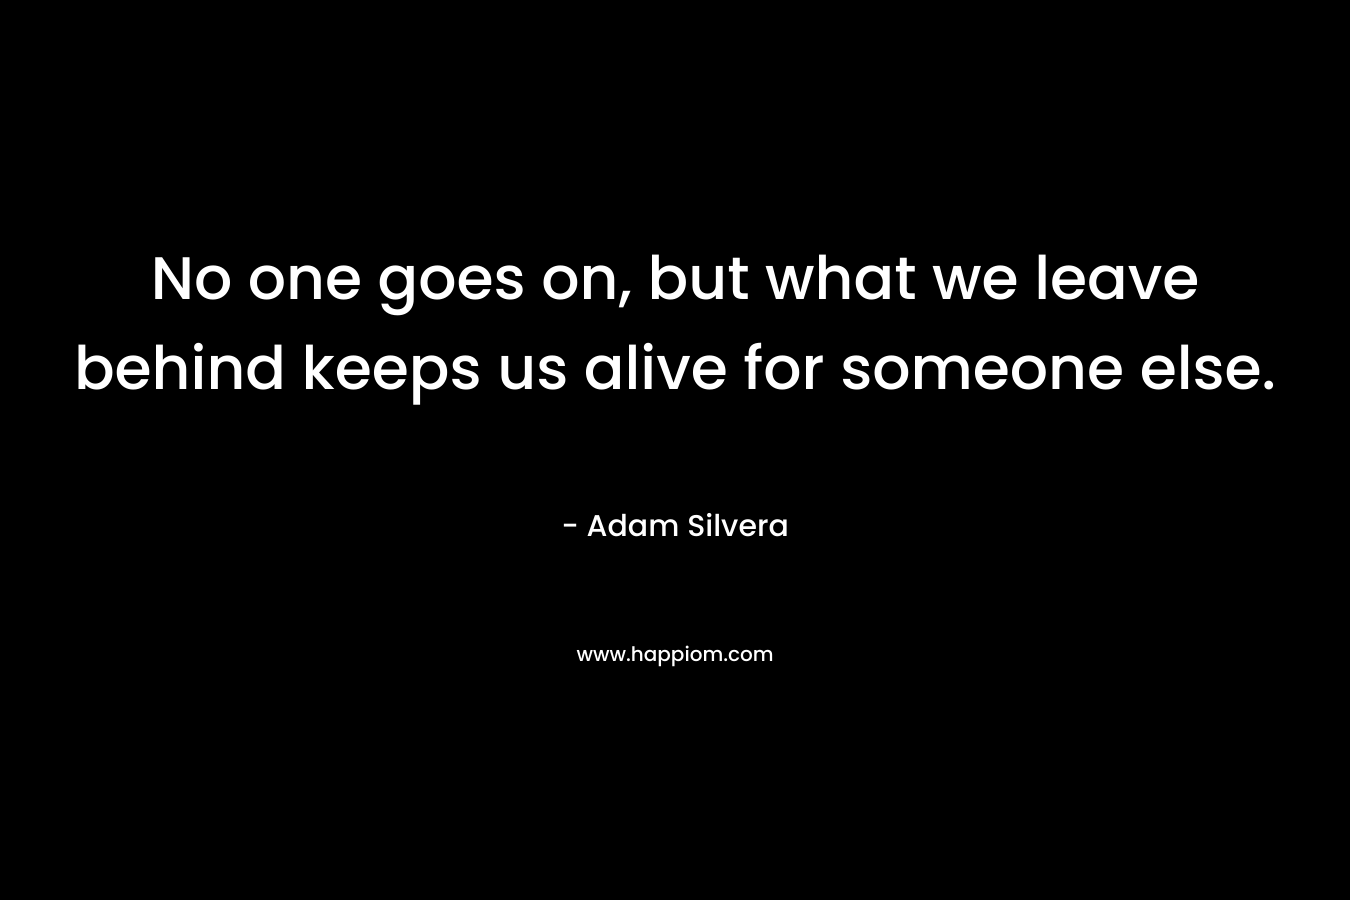 No one goes on, but what we leave behind keeps us alive for someone else. – Adam Silvera